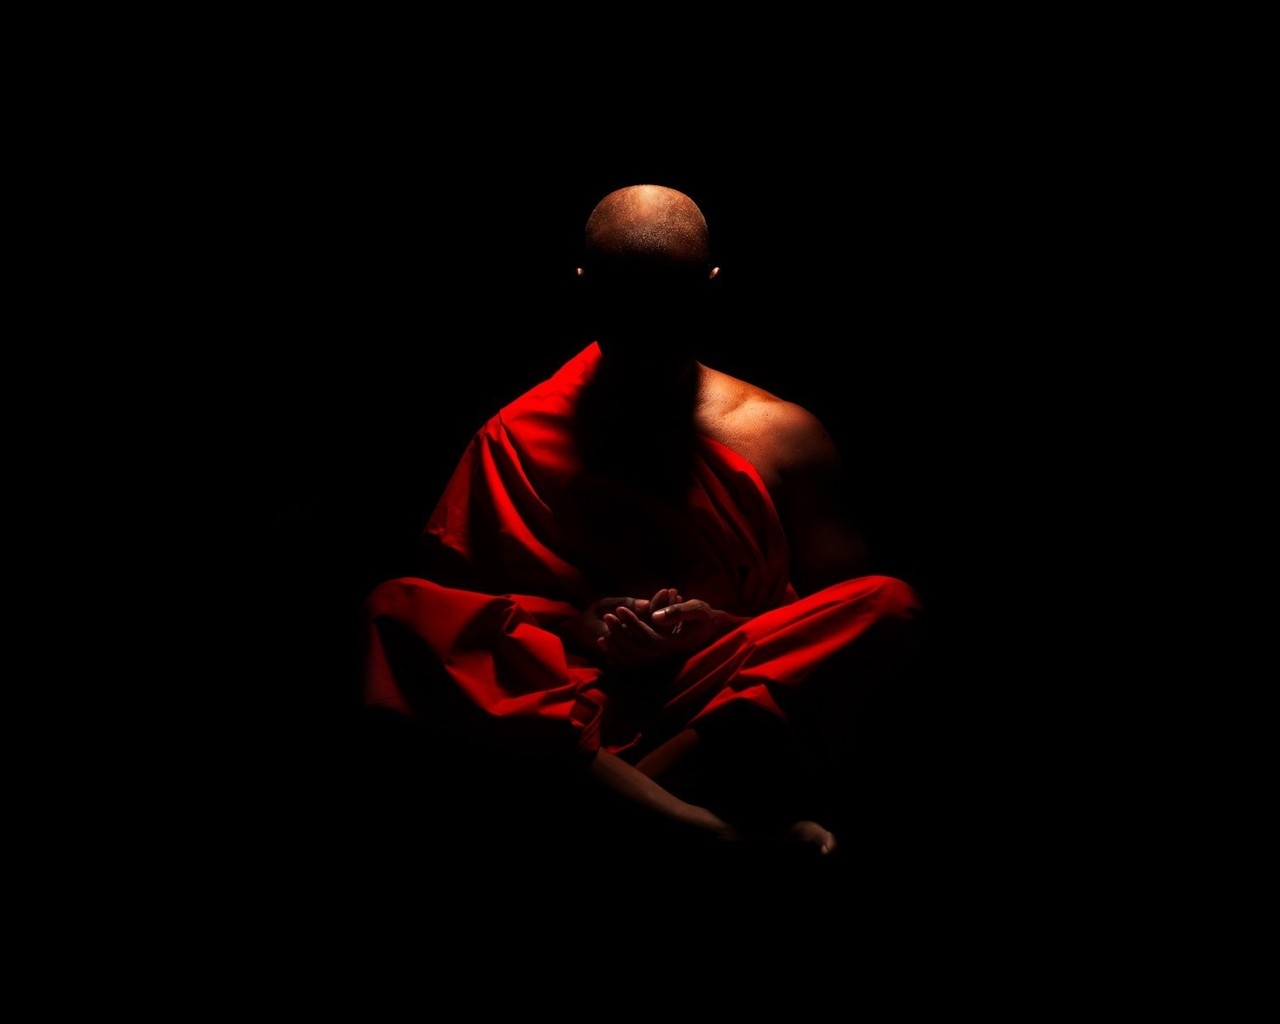 Shaolin Monk for 1280 x 1024 resolution